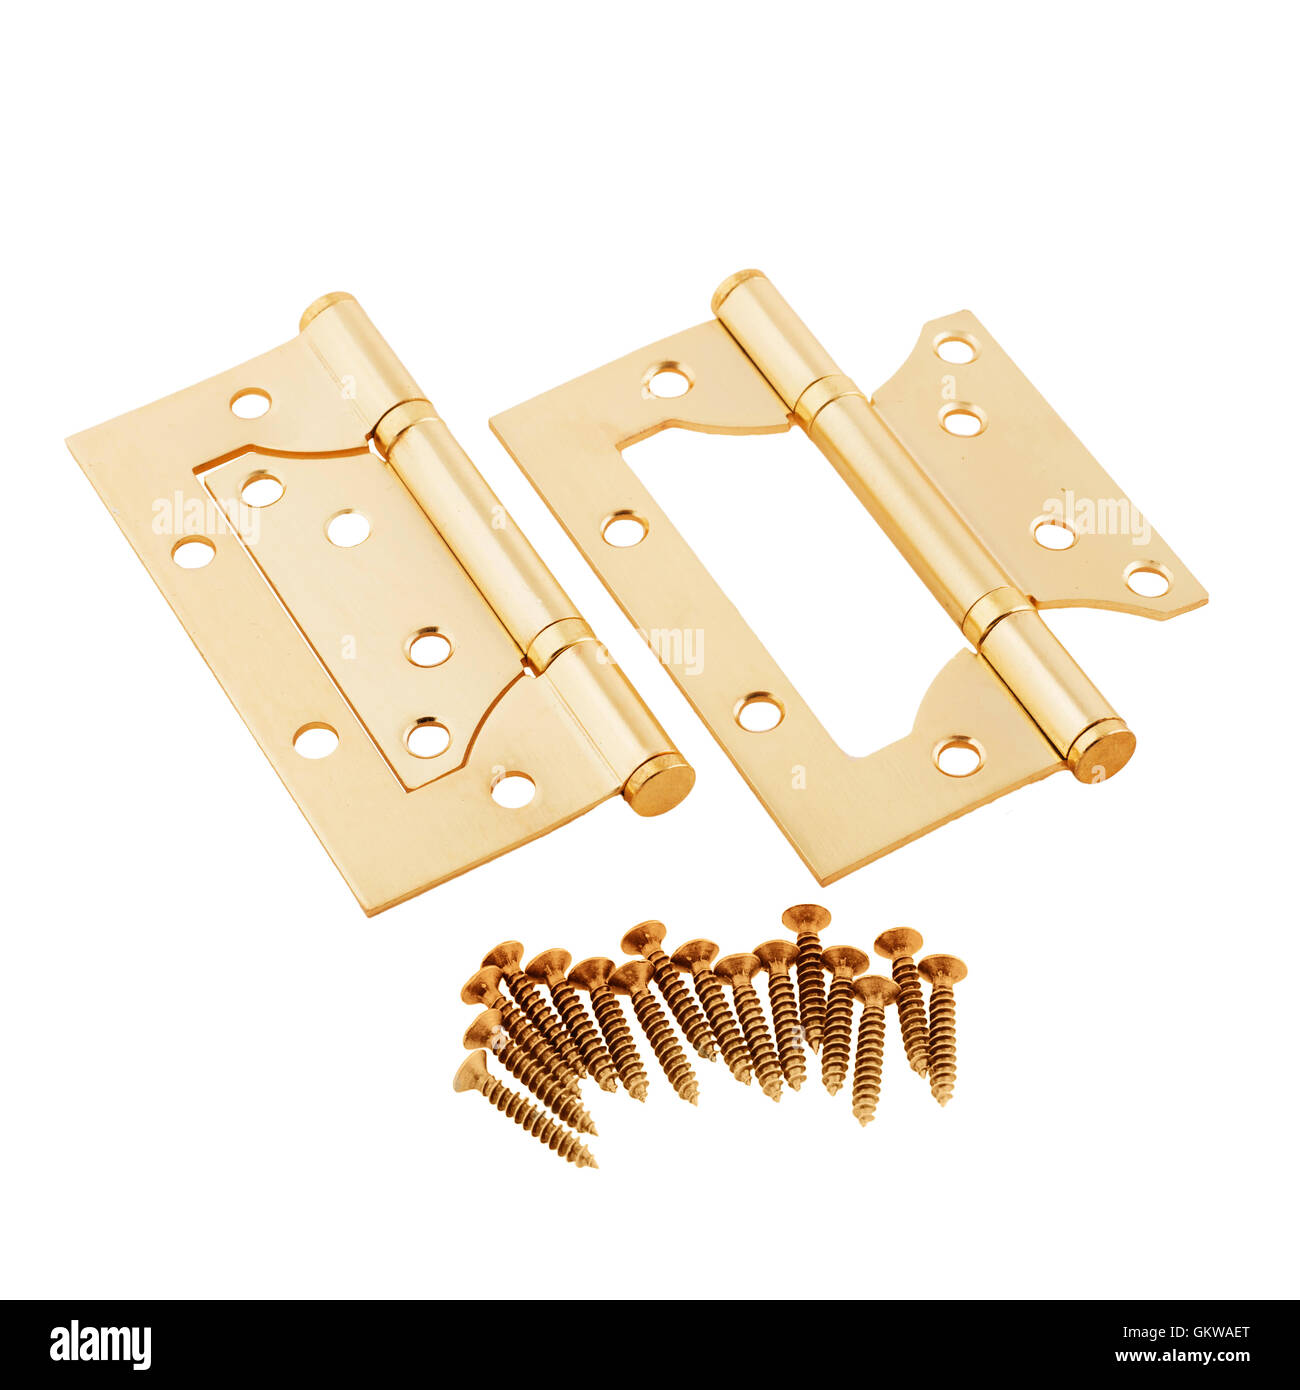 Small Hinges For Doors On A White Background Stock Photo, Picture and  Royalty Free Image. Image 29609582.